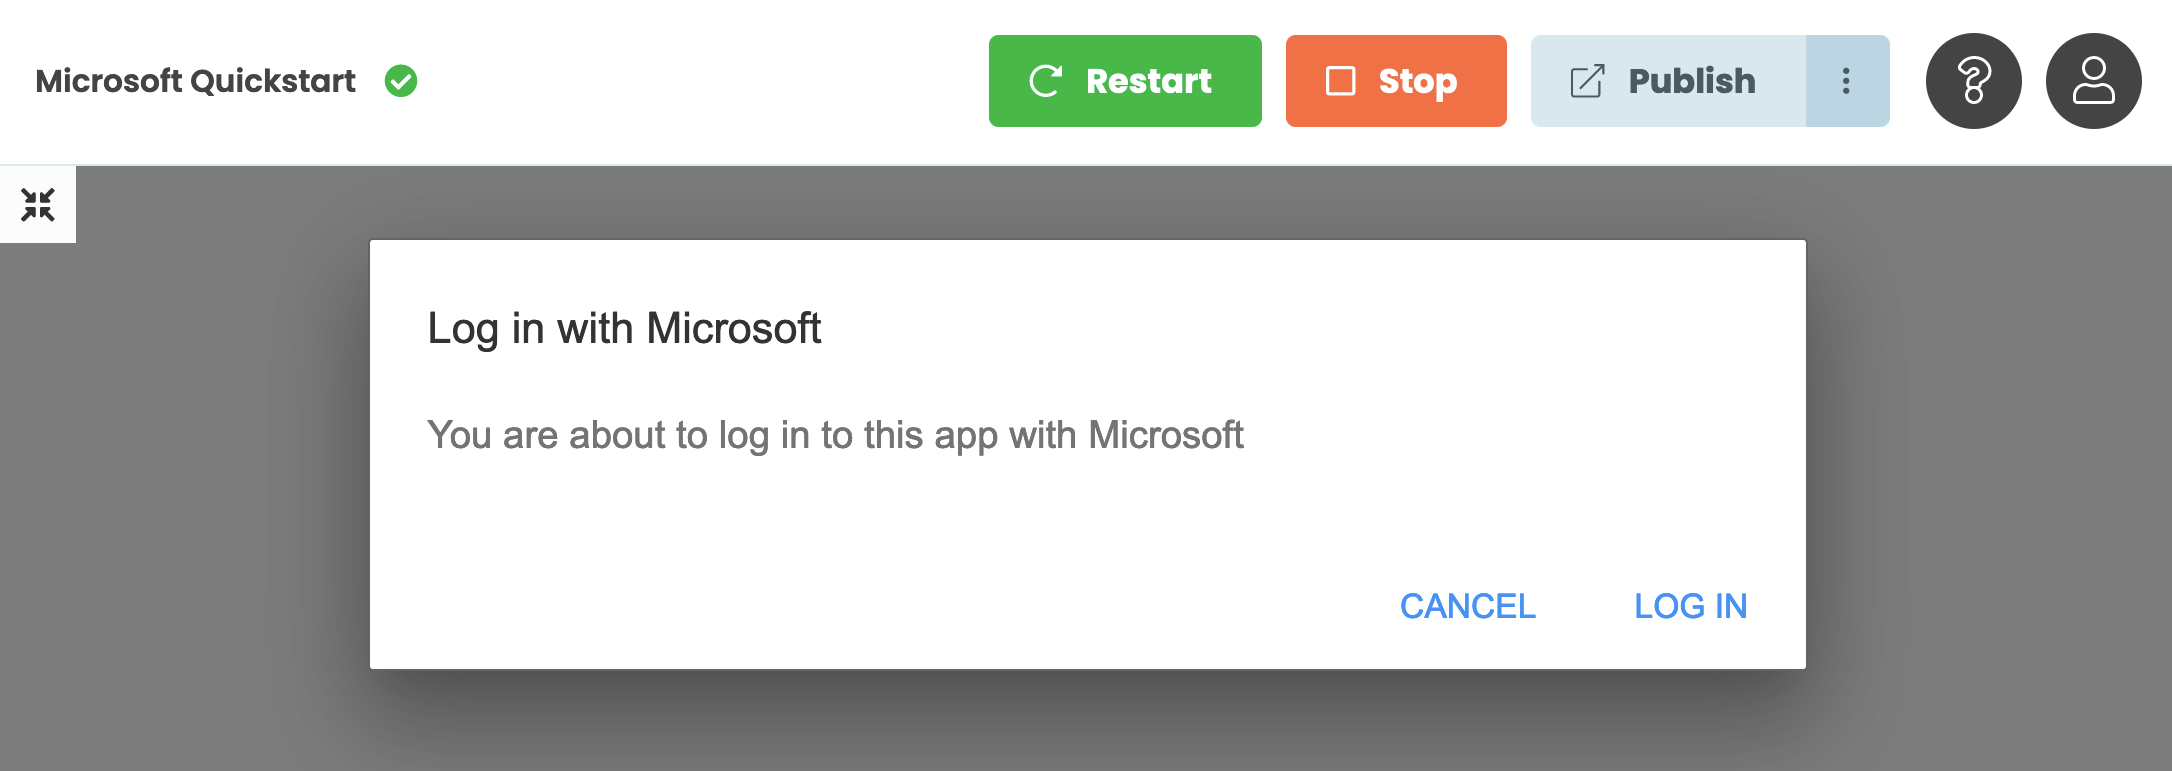 A running app showing a dialog with 'cancel' and 'log in' buttons, and a message informing you you are about to log in with Microsoft.